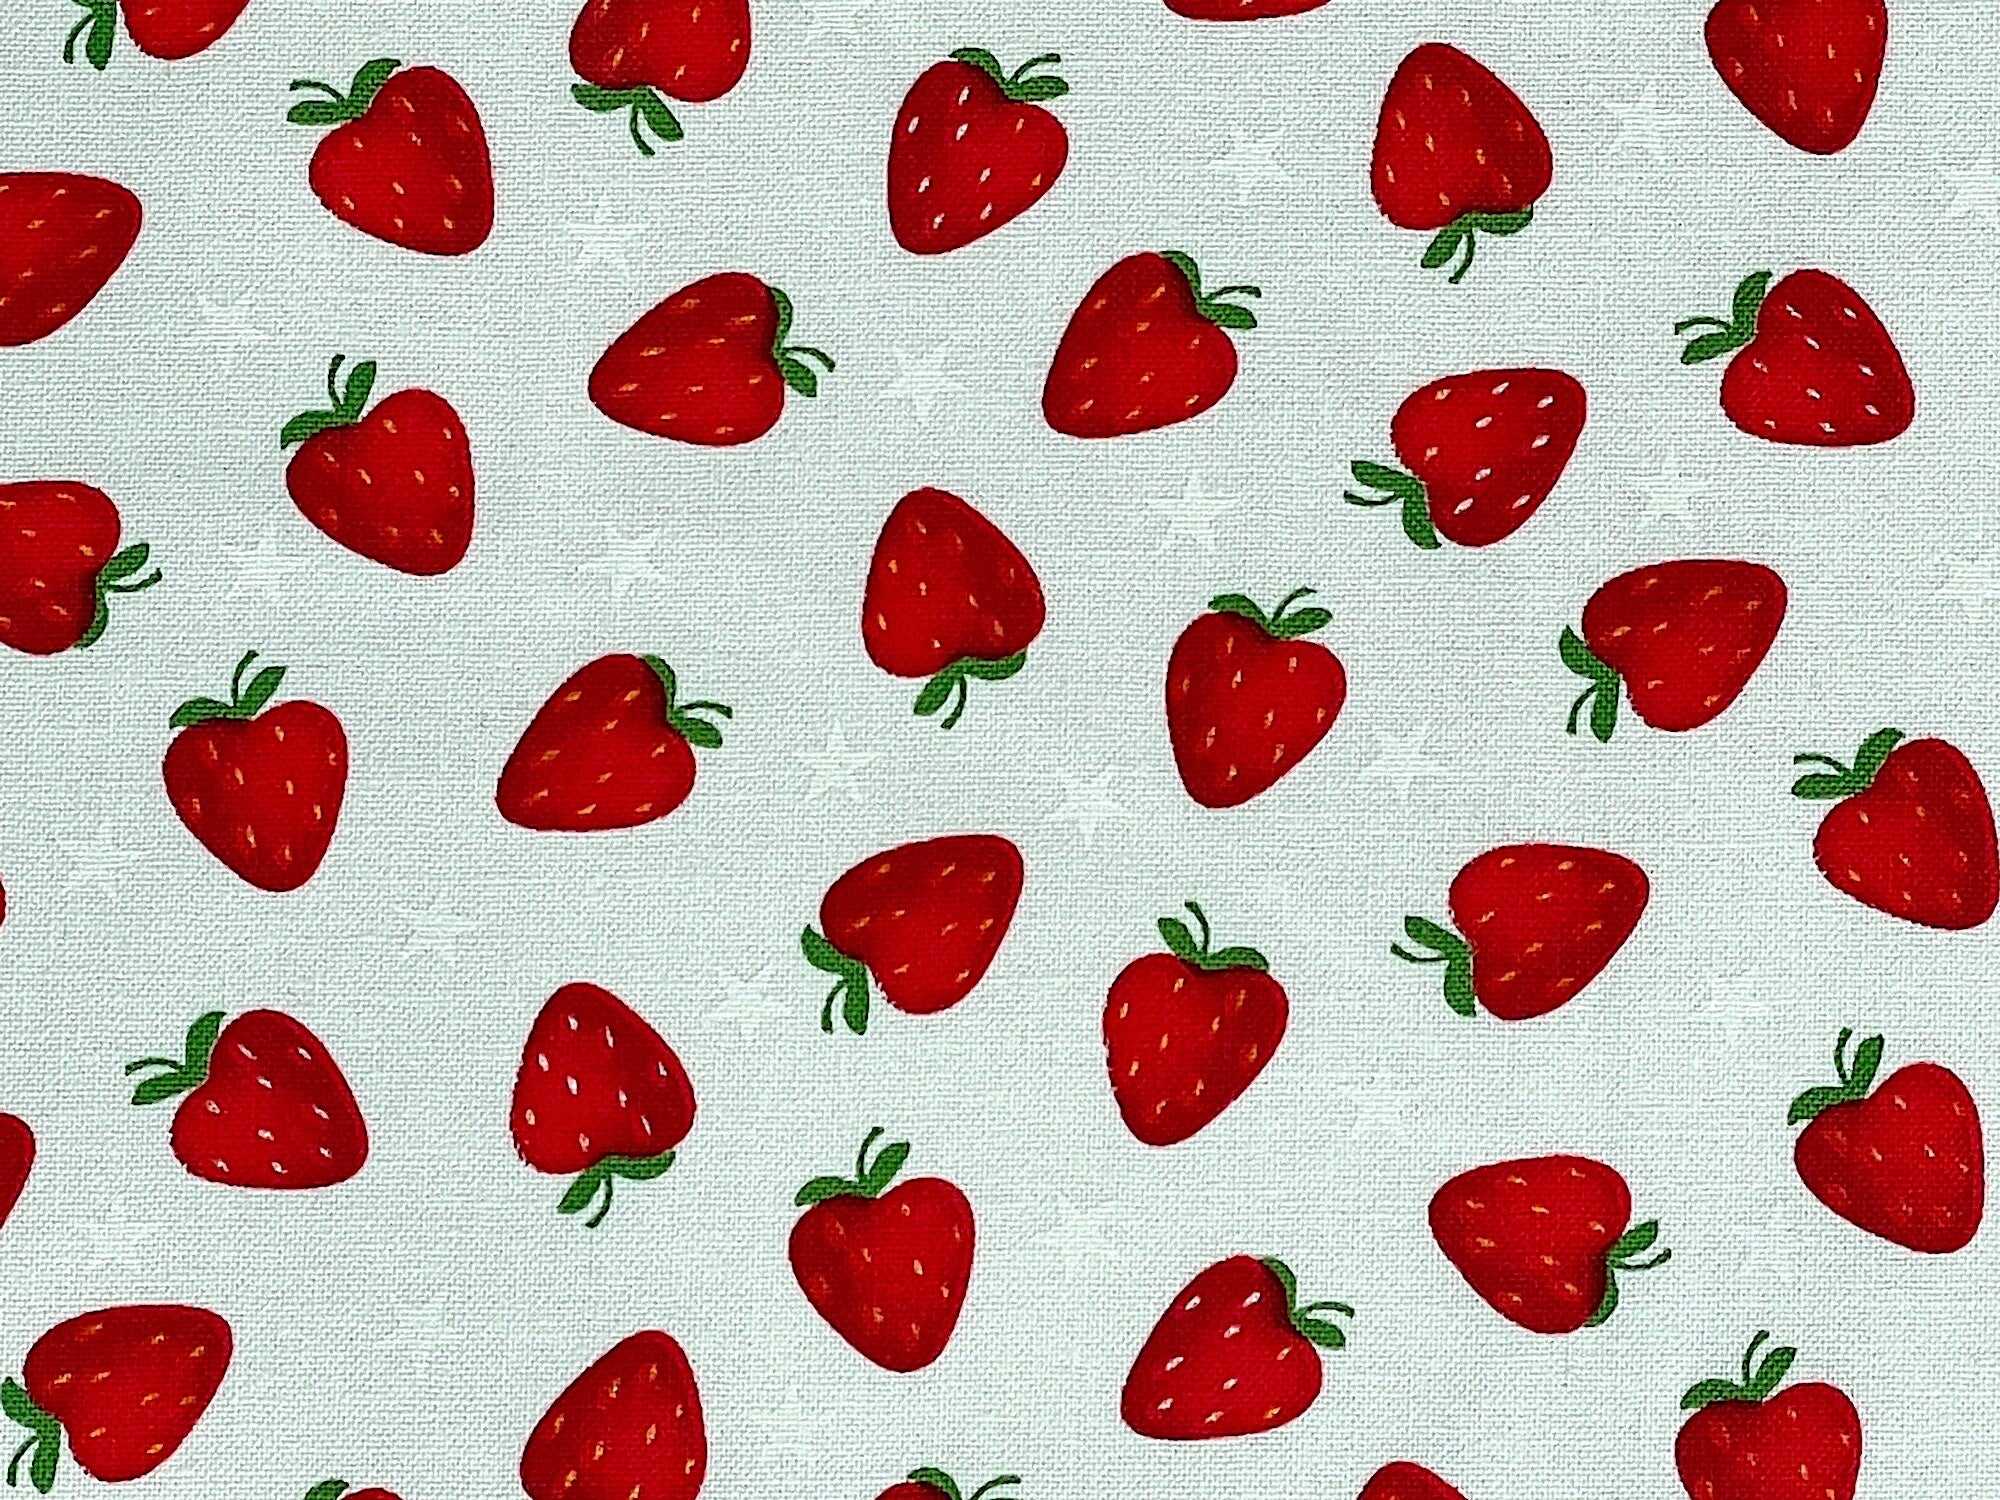 Colorful print from the "My Happy Place" collection. This one is of tossed strawberries. Pretty bright Red Strawberries with white stars. The background is an off-white or cream color.